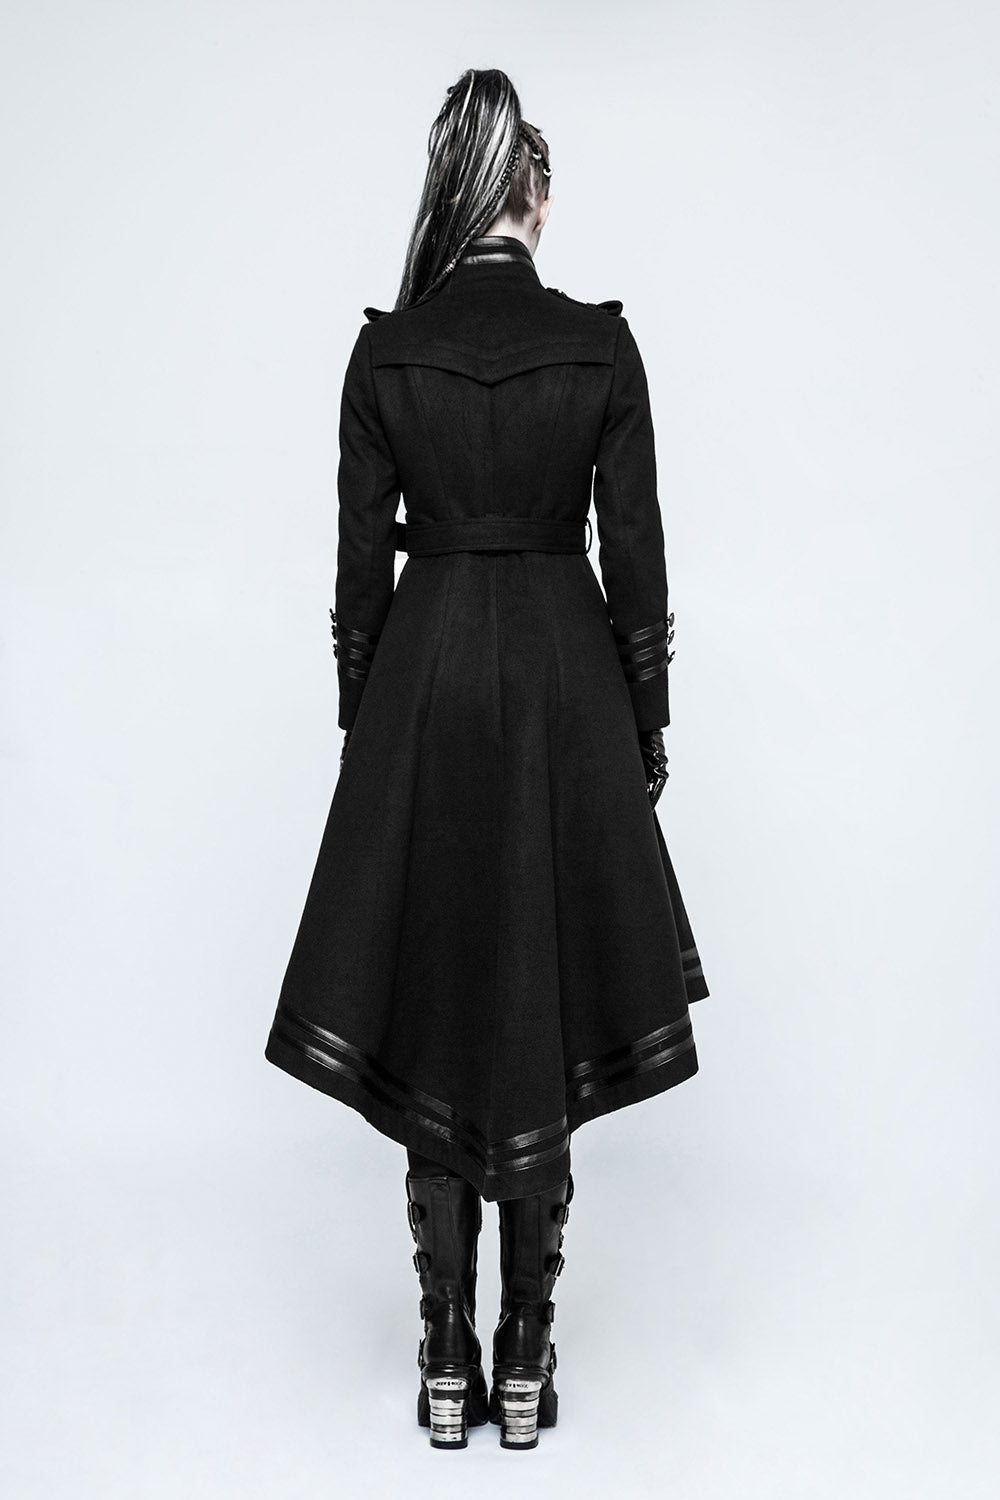 Seance Soldier Military Goth Coat